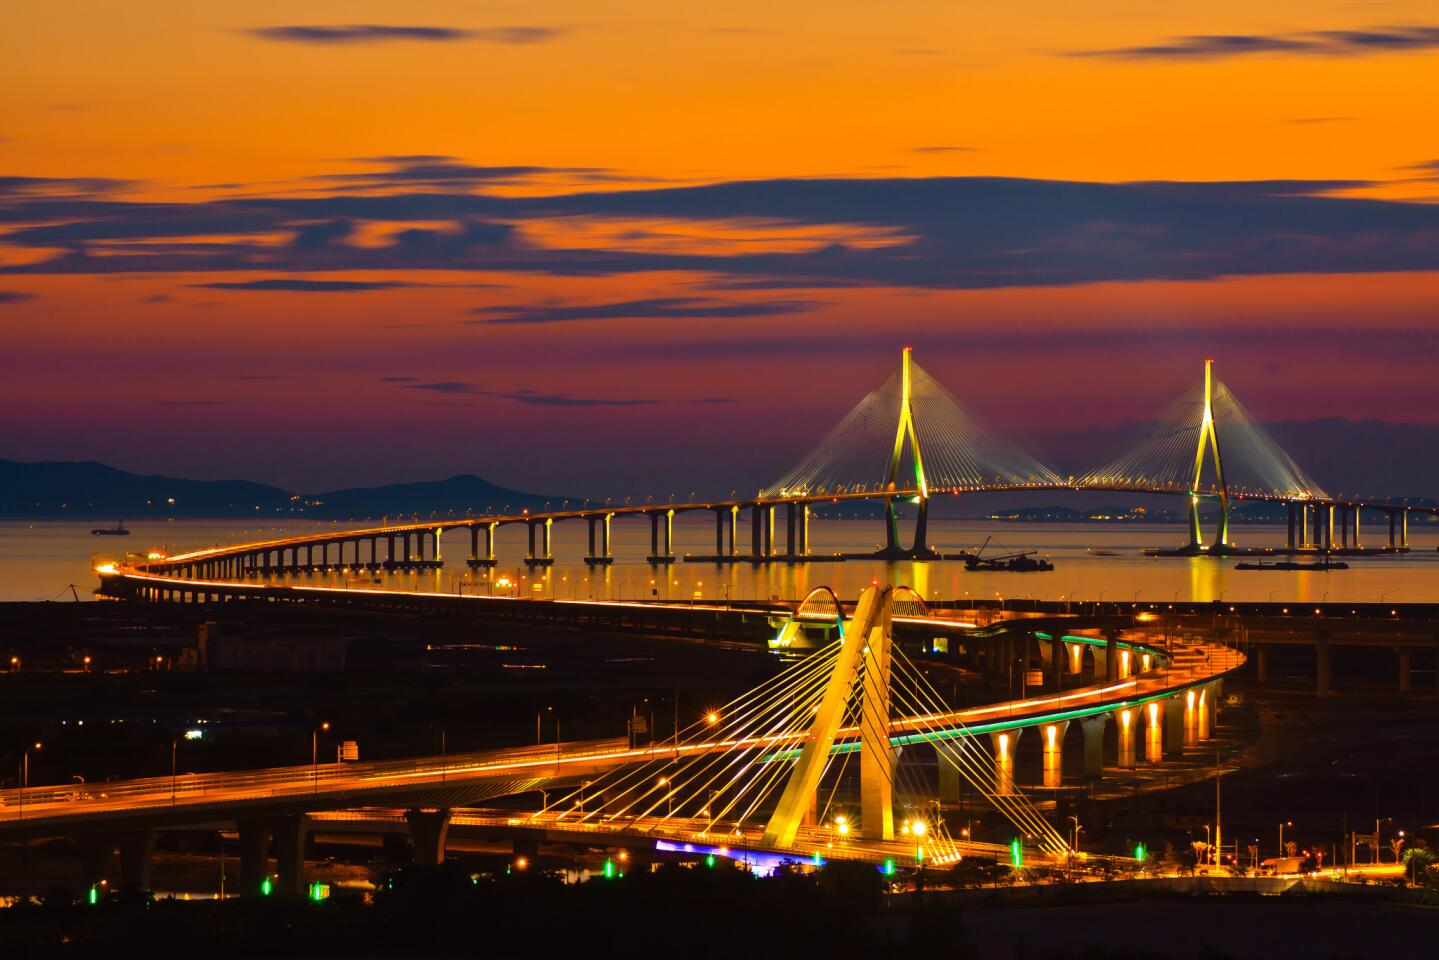 This $1.4 billion cable-style bridge just outside of Seoul, South Korea, was paid for by Samsung, according to CNN. At just over 13 miles, it runs from the Incheon Airport to Seoul.